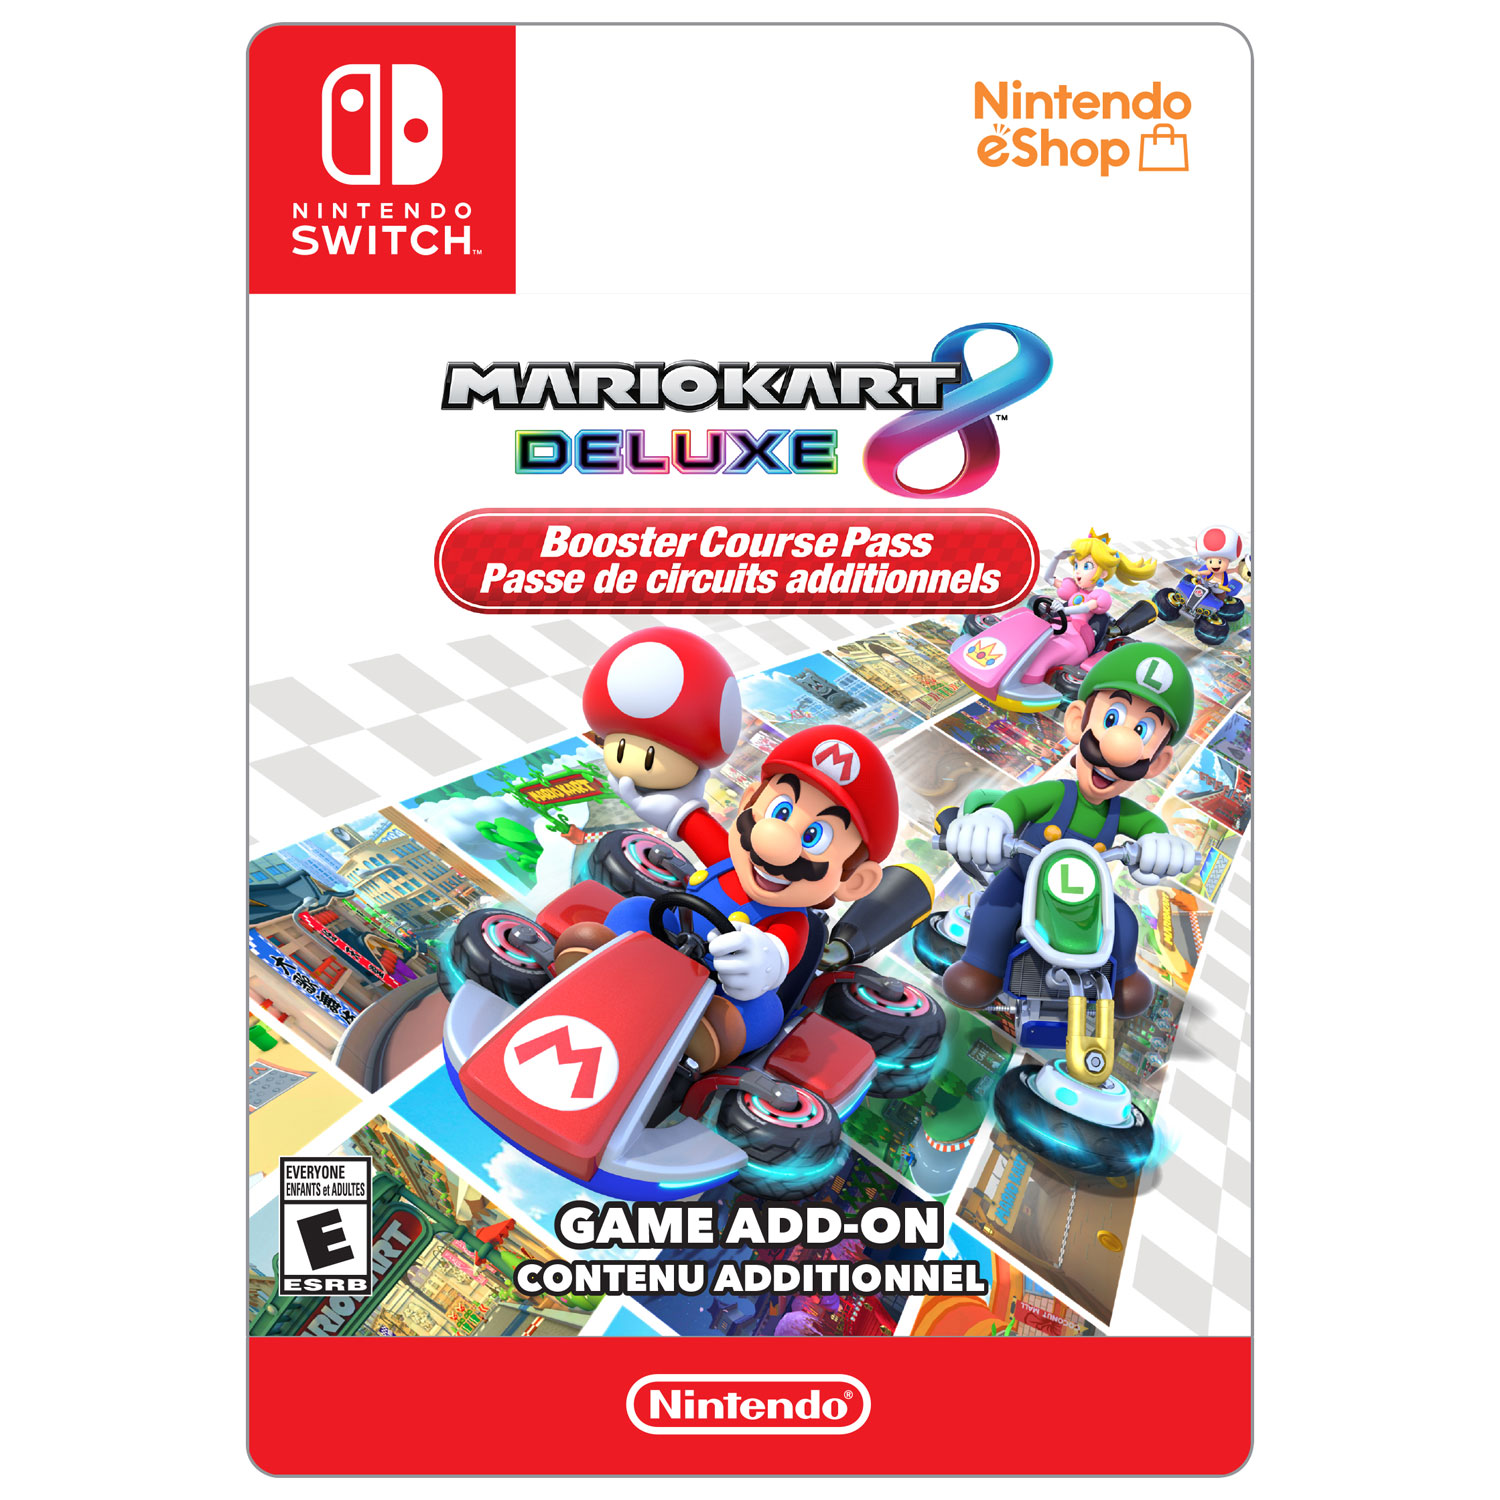 Mario Kart 8 Deluxe Booster Course Pass (Switch) - Digital Download